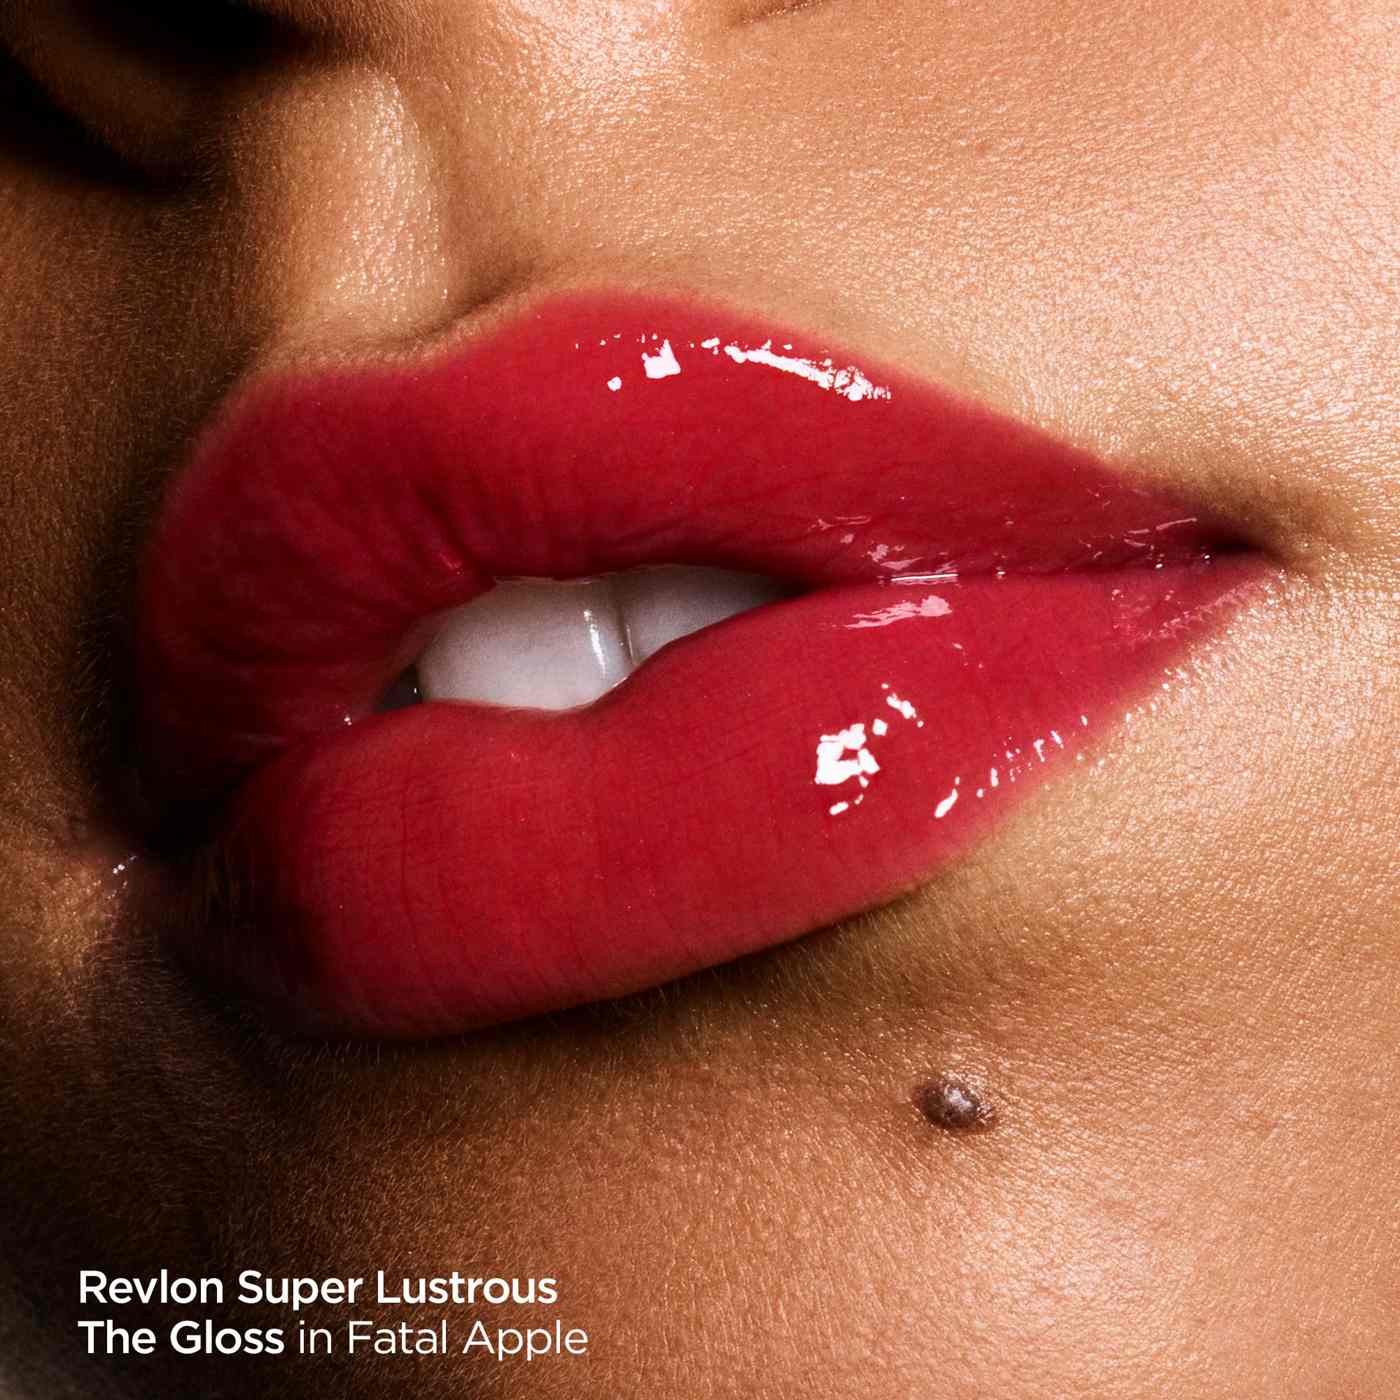 Revlon Super Lustrous The Gloss, 200 Crystal Clear; image 2 of 7